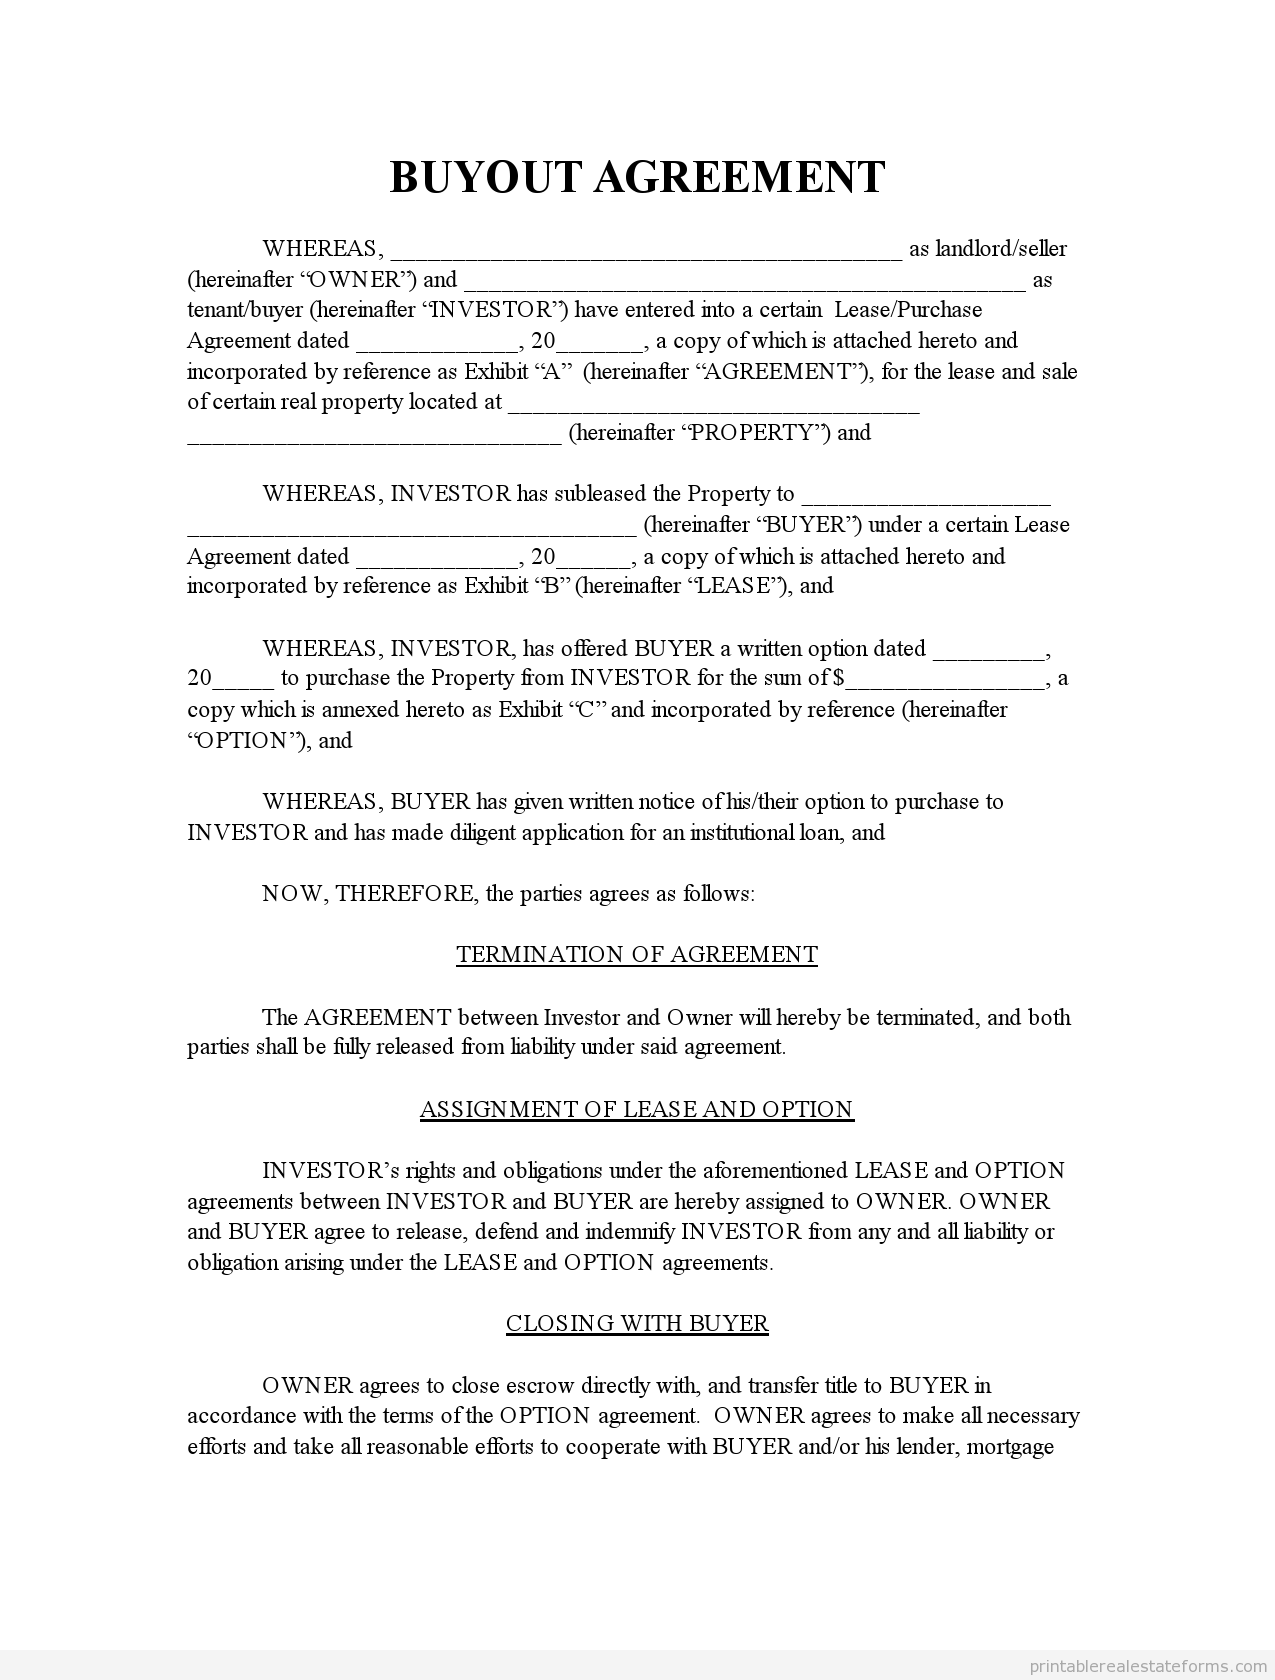 Free Buyout Agreement Template. Real Estate Buyout Agreement Form 